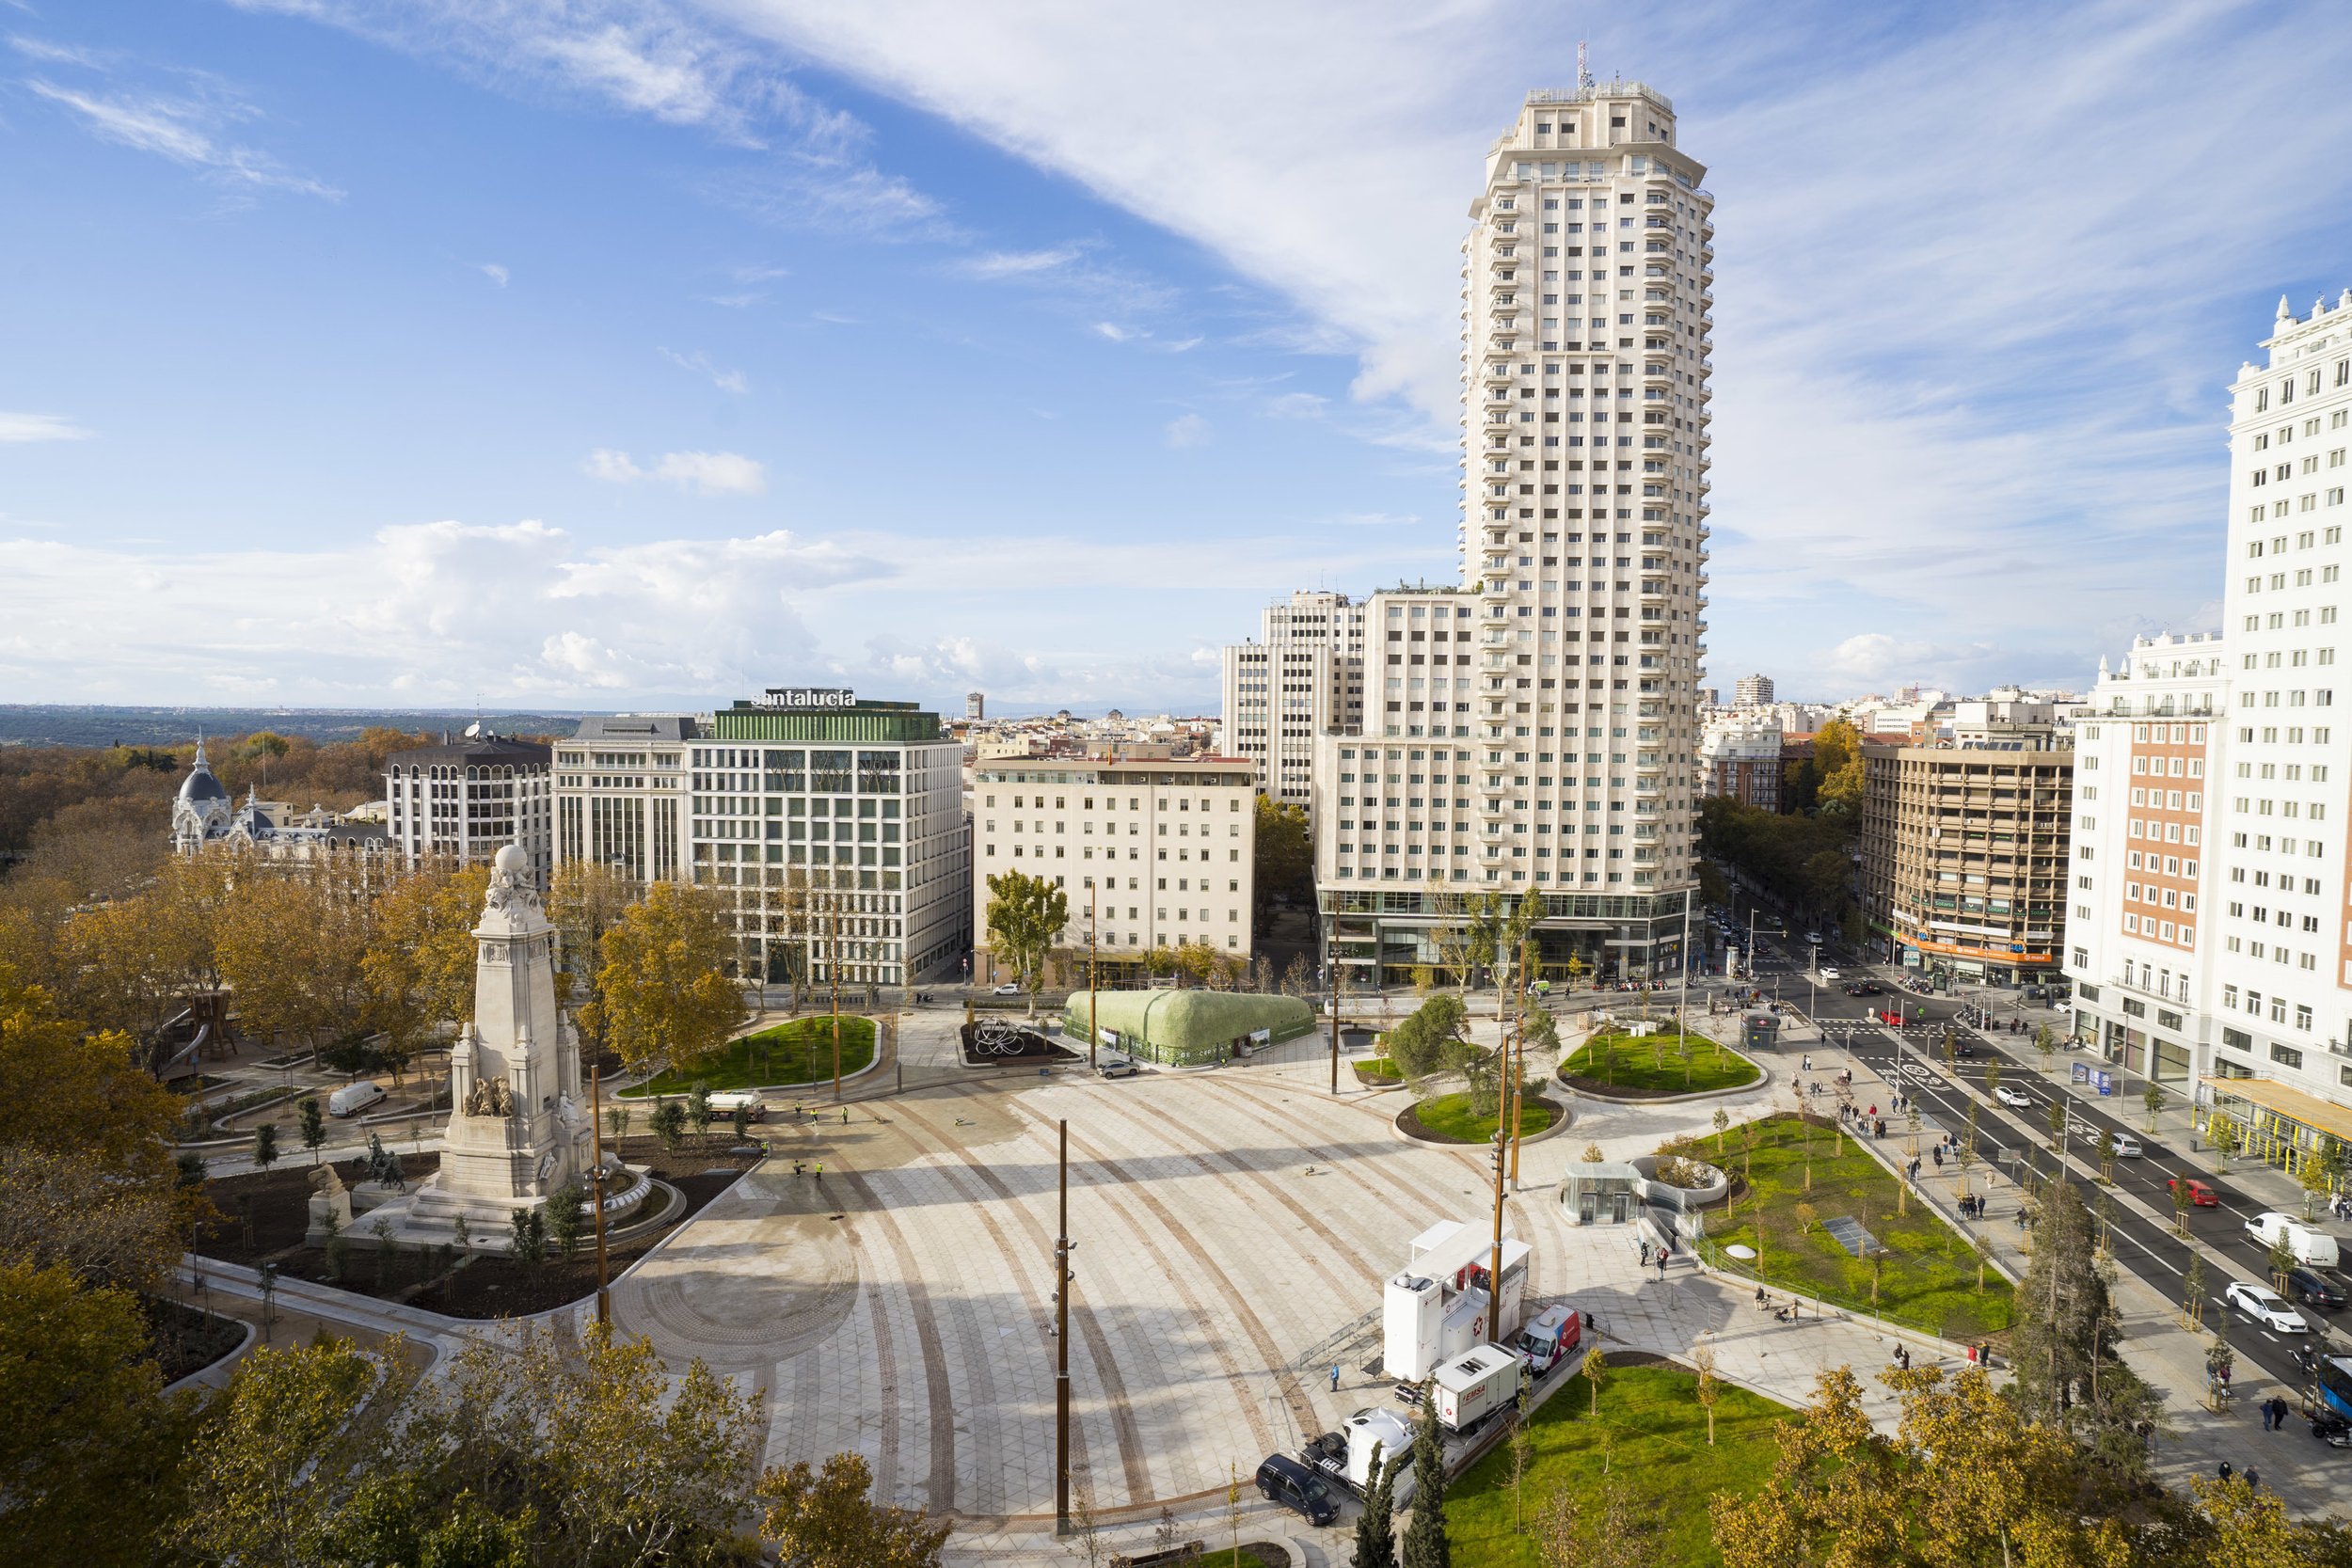 DAILY BEAST: Madrid's New 'Frying Pan' Plaza Leaves Some Locals Fuming